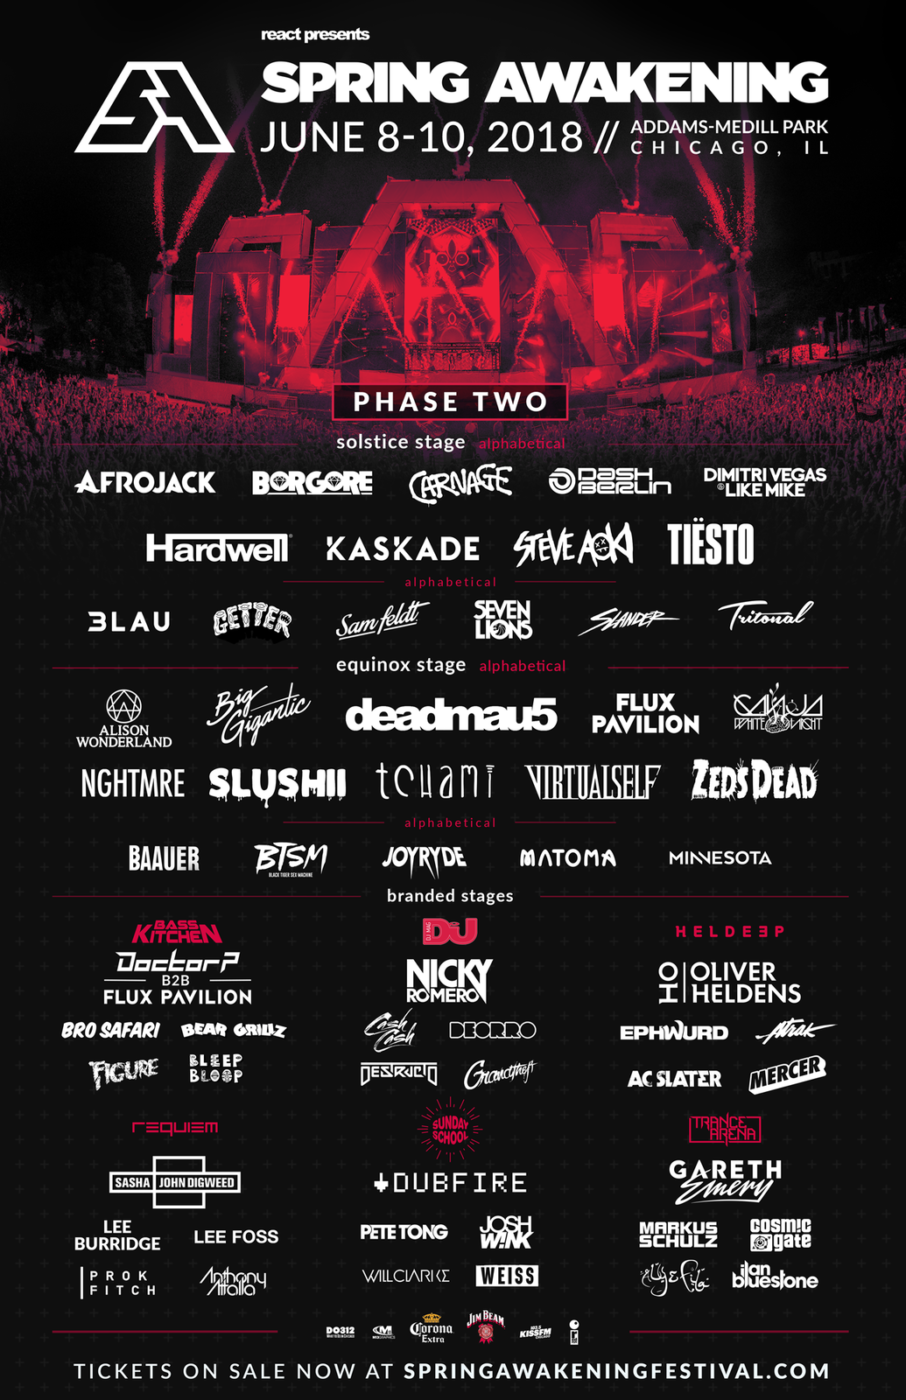 Spring Awakening Announces Newest Lineup Additions [Win Passes Here